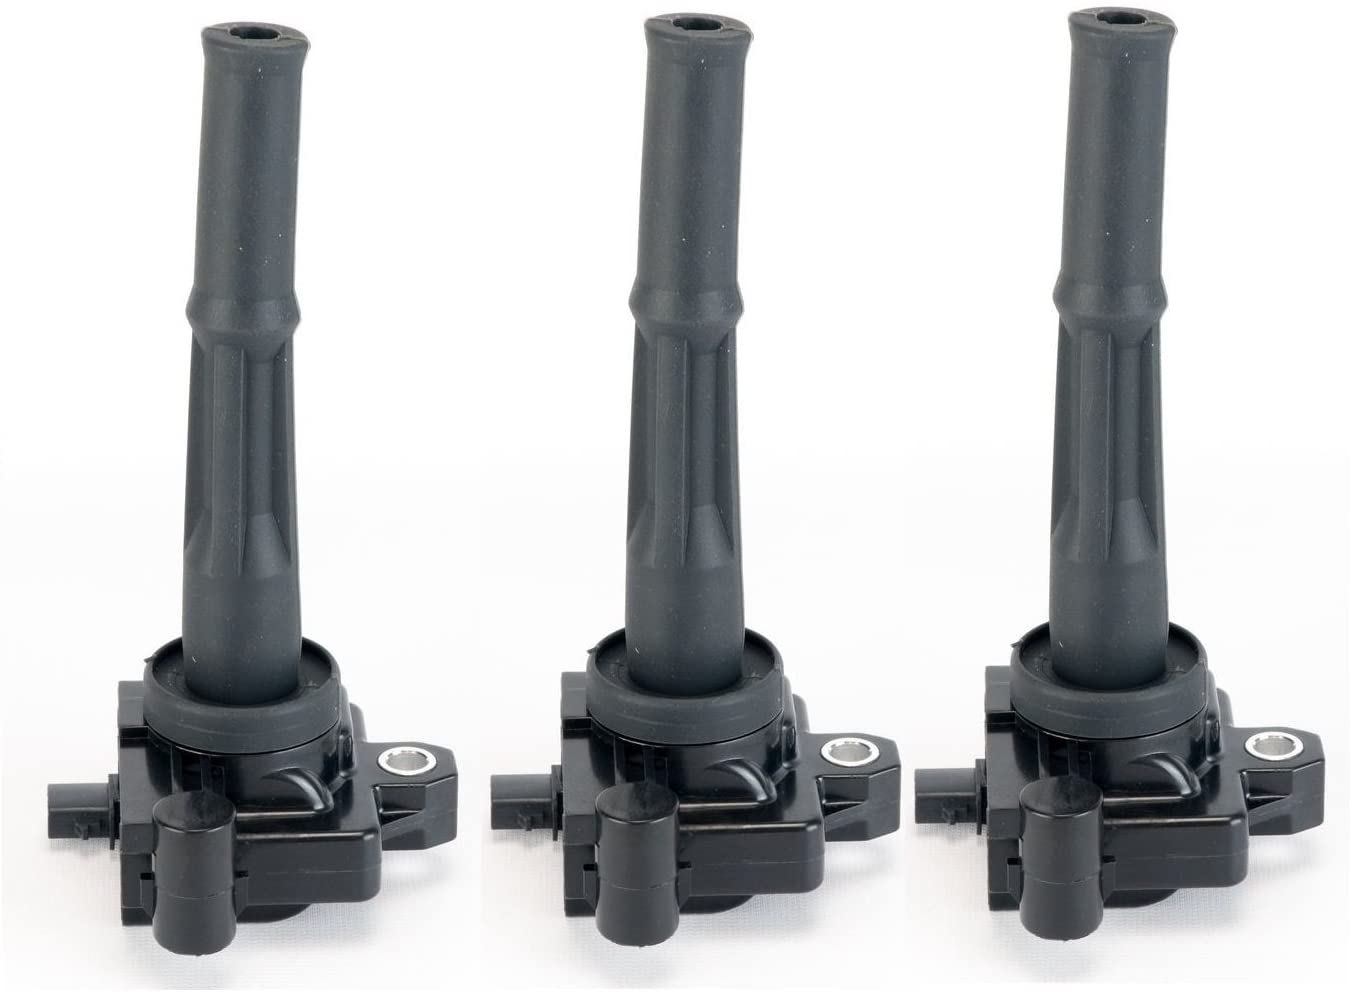 Ignition Coil Pack Set of 3 - Coil Pack Compatible with Tacoma, 4Runner, Tundra, T100 3.4L V6 Models - Replaces Part 90919-02212 - Models Years 95, 96, 97, 98, 99, 2000, 2001, 2002, 2003, 2004